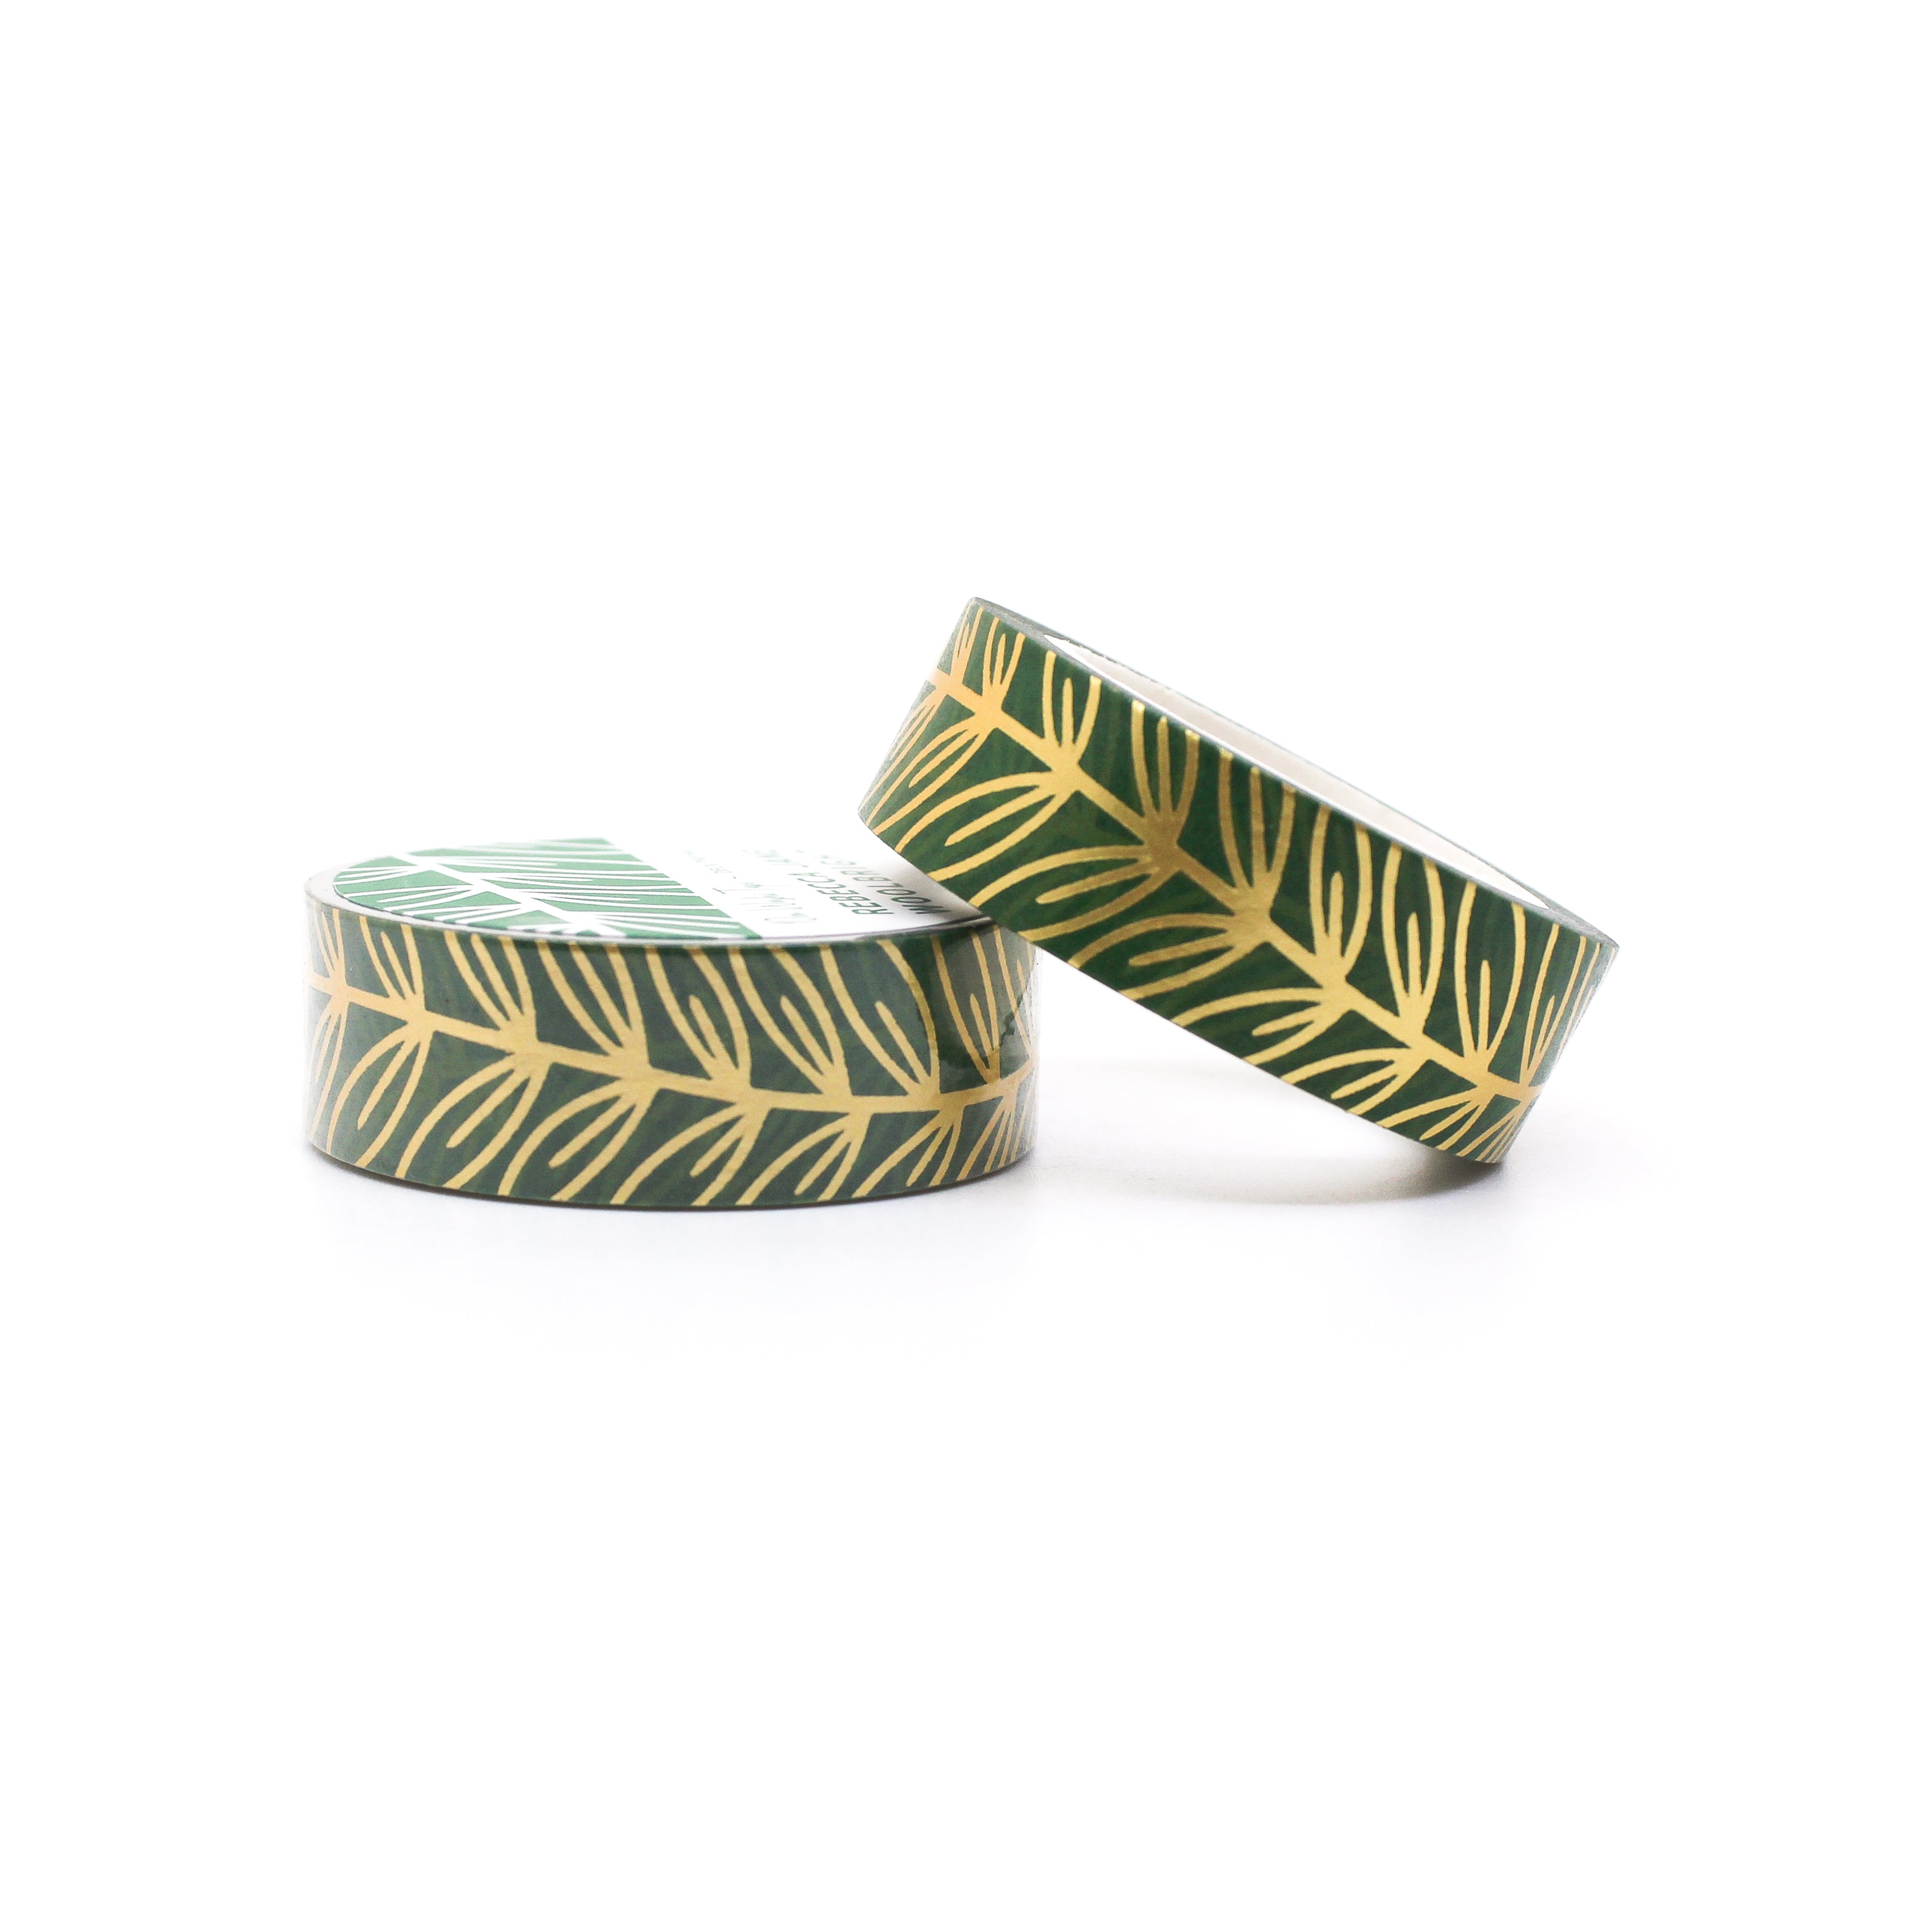 This is a roll of green vines washi tapes from BBB Supplies Craft Shop